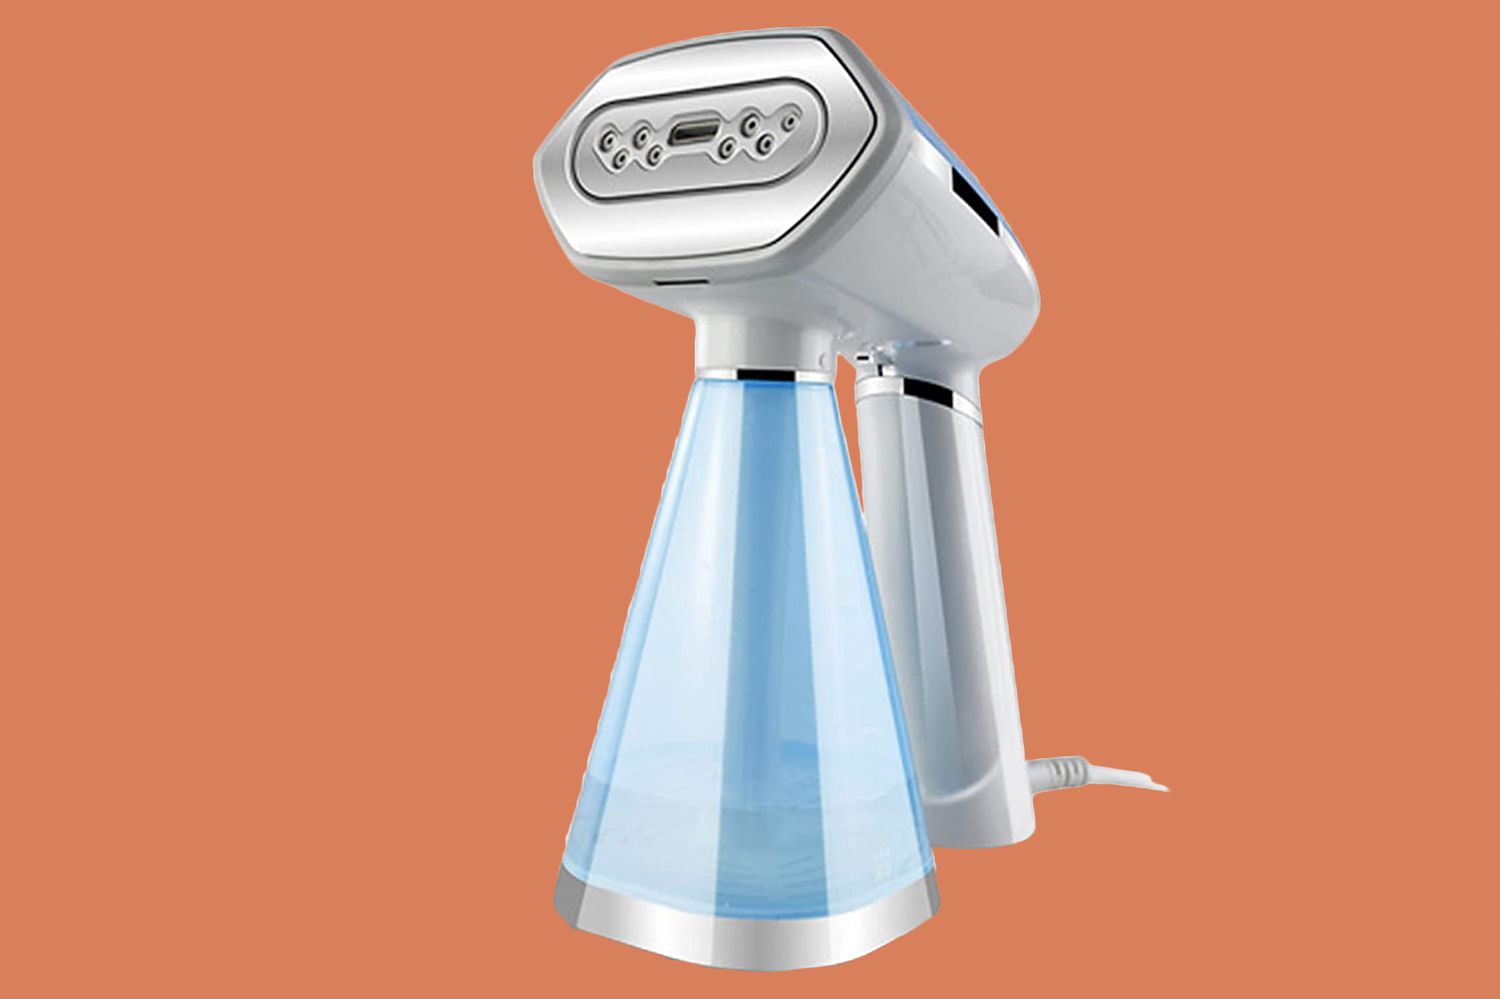 clothing fabric steamer